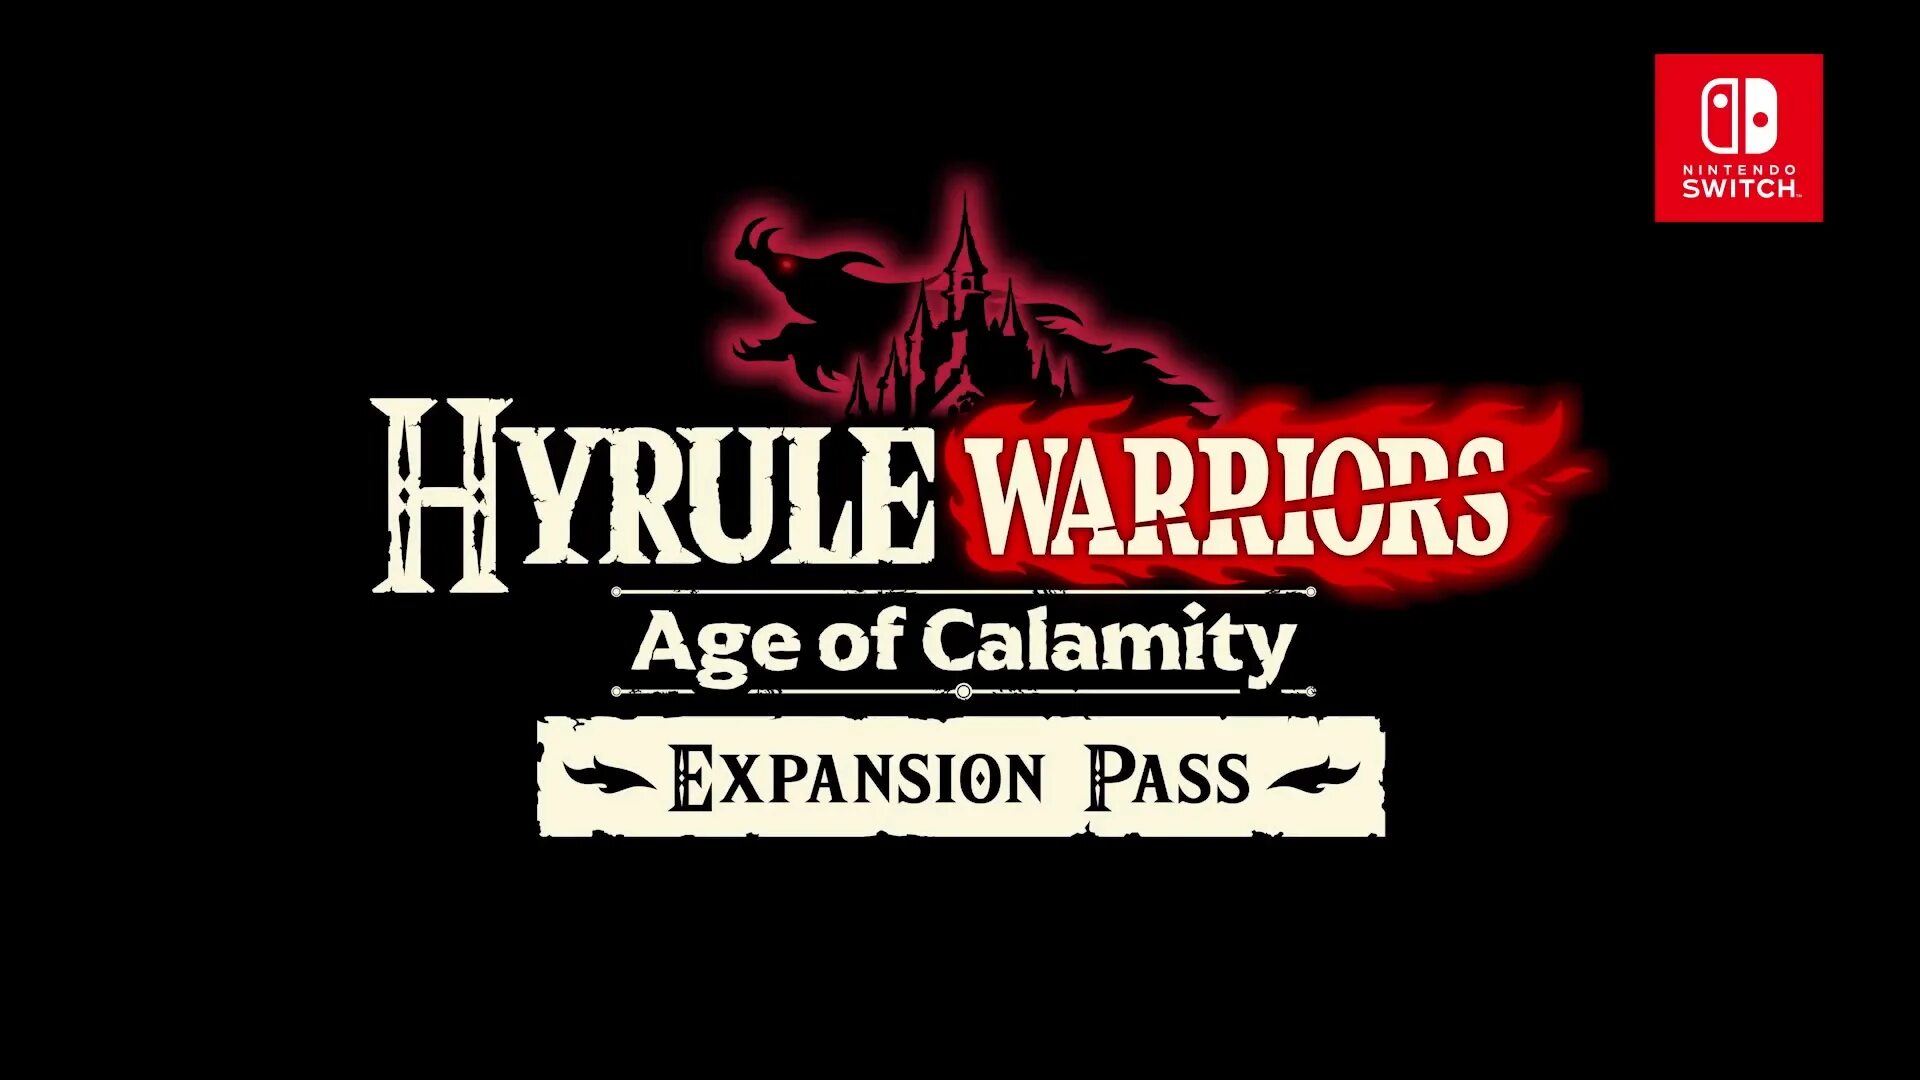 Little Guardian age of Calamity. Warriors age of calamity